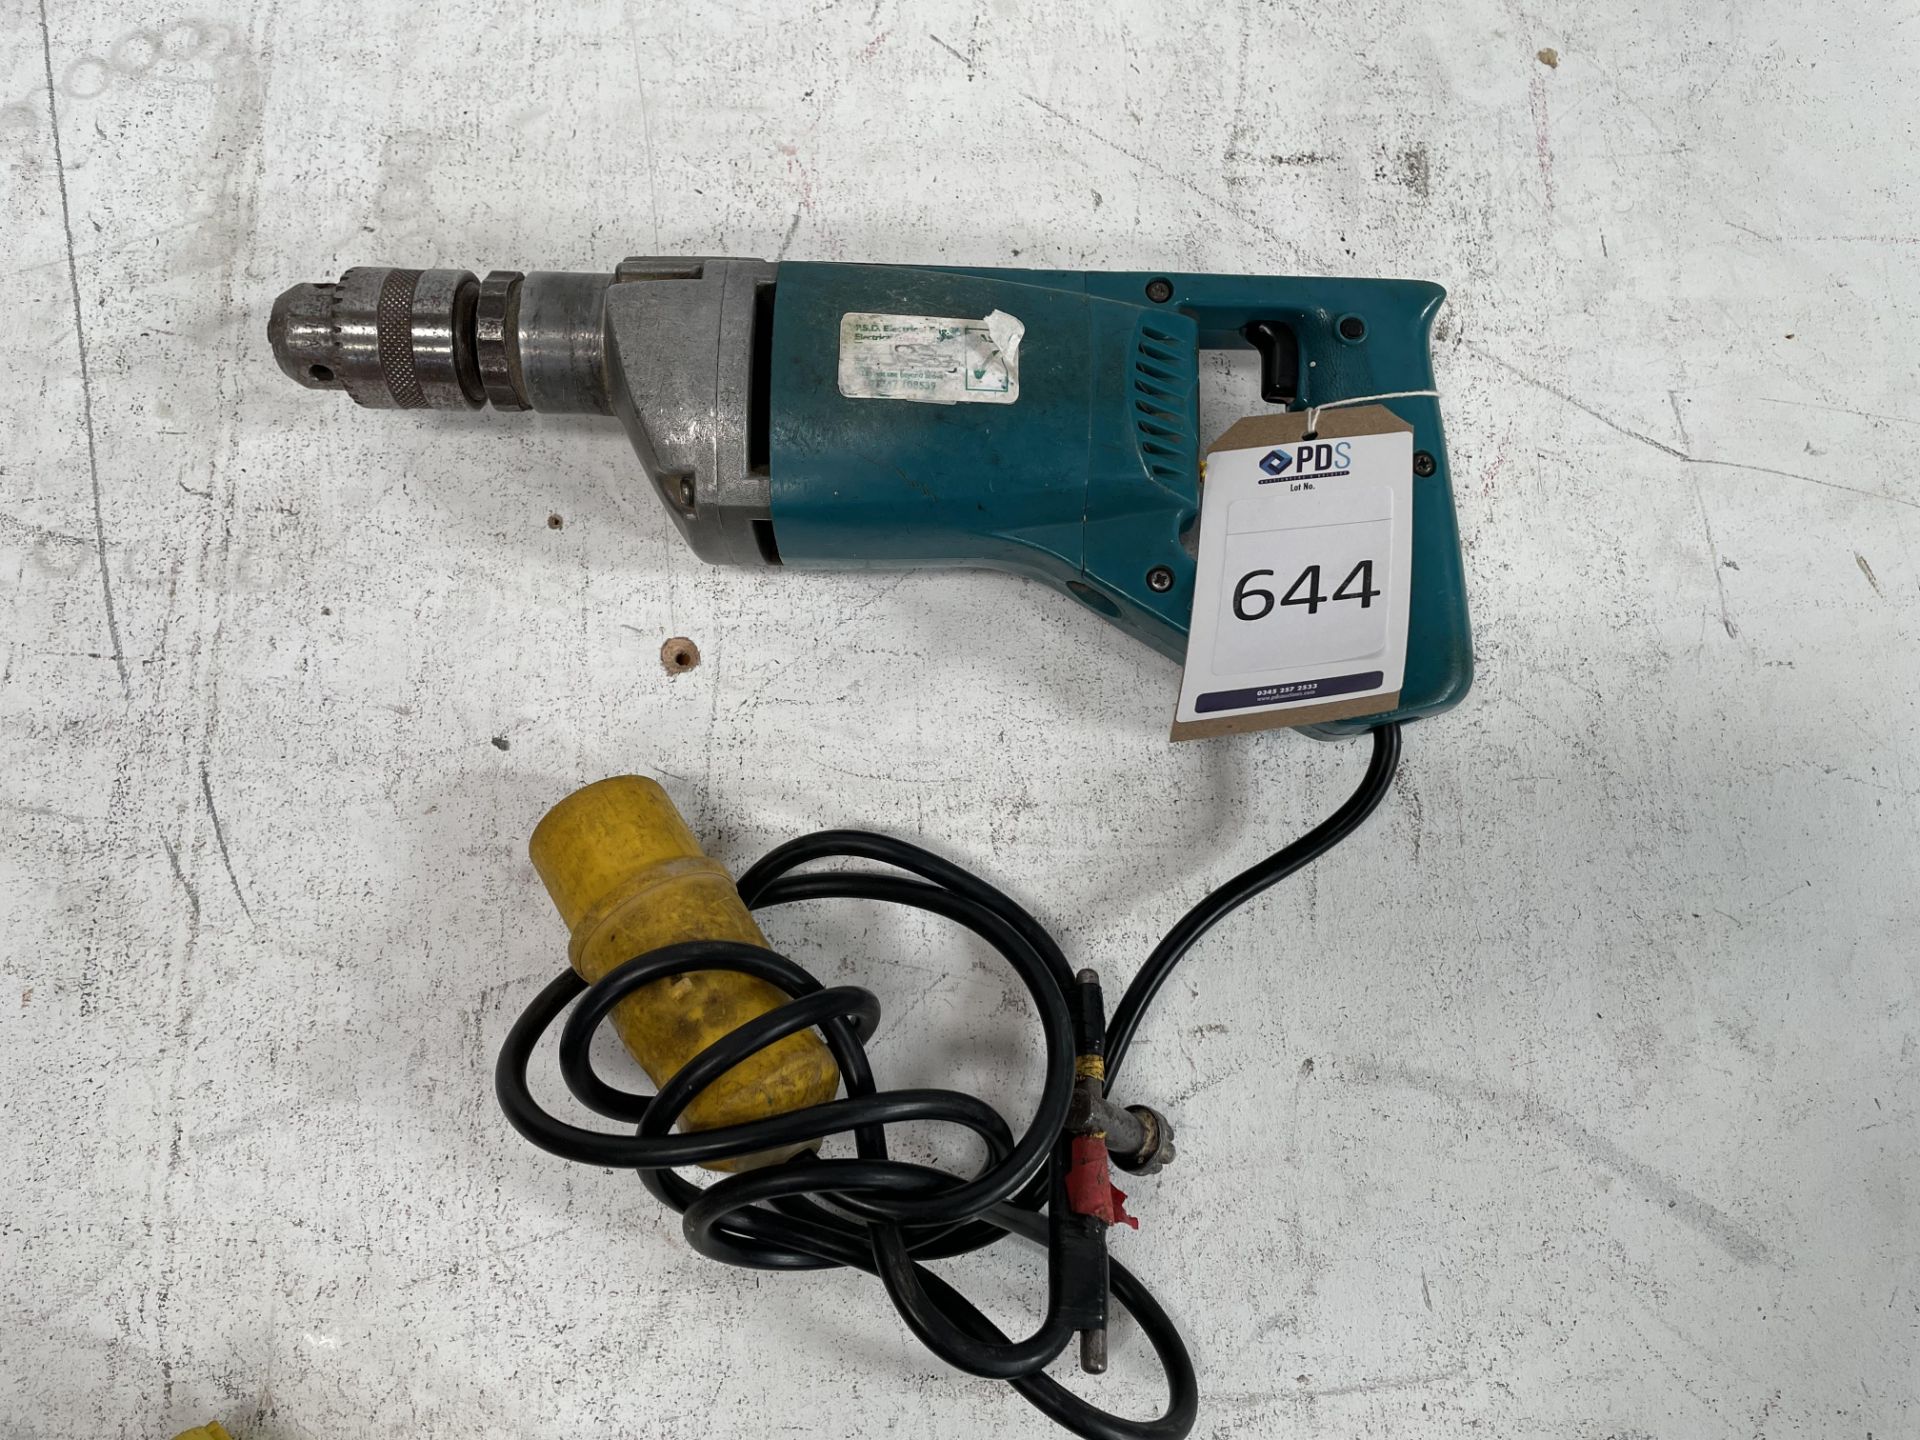 Makita Hammer Drill, 110v (Location: Brentwood. Please Refer to General Notes)